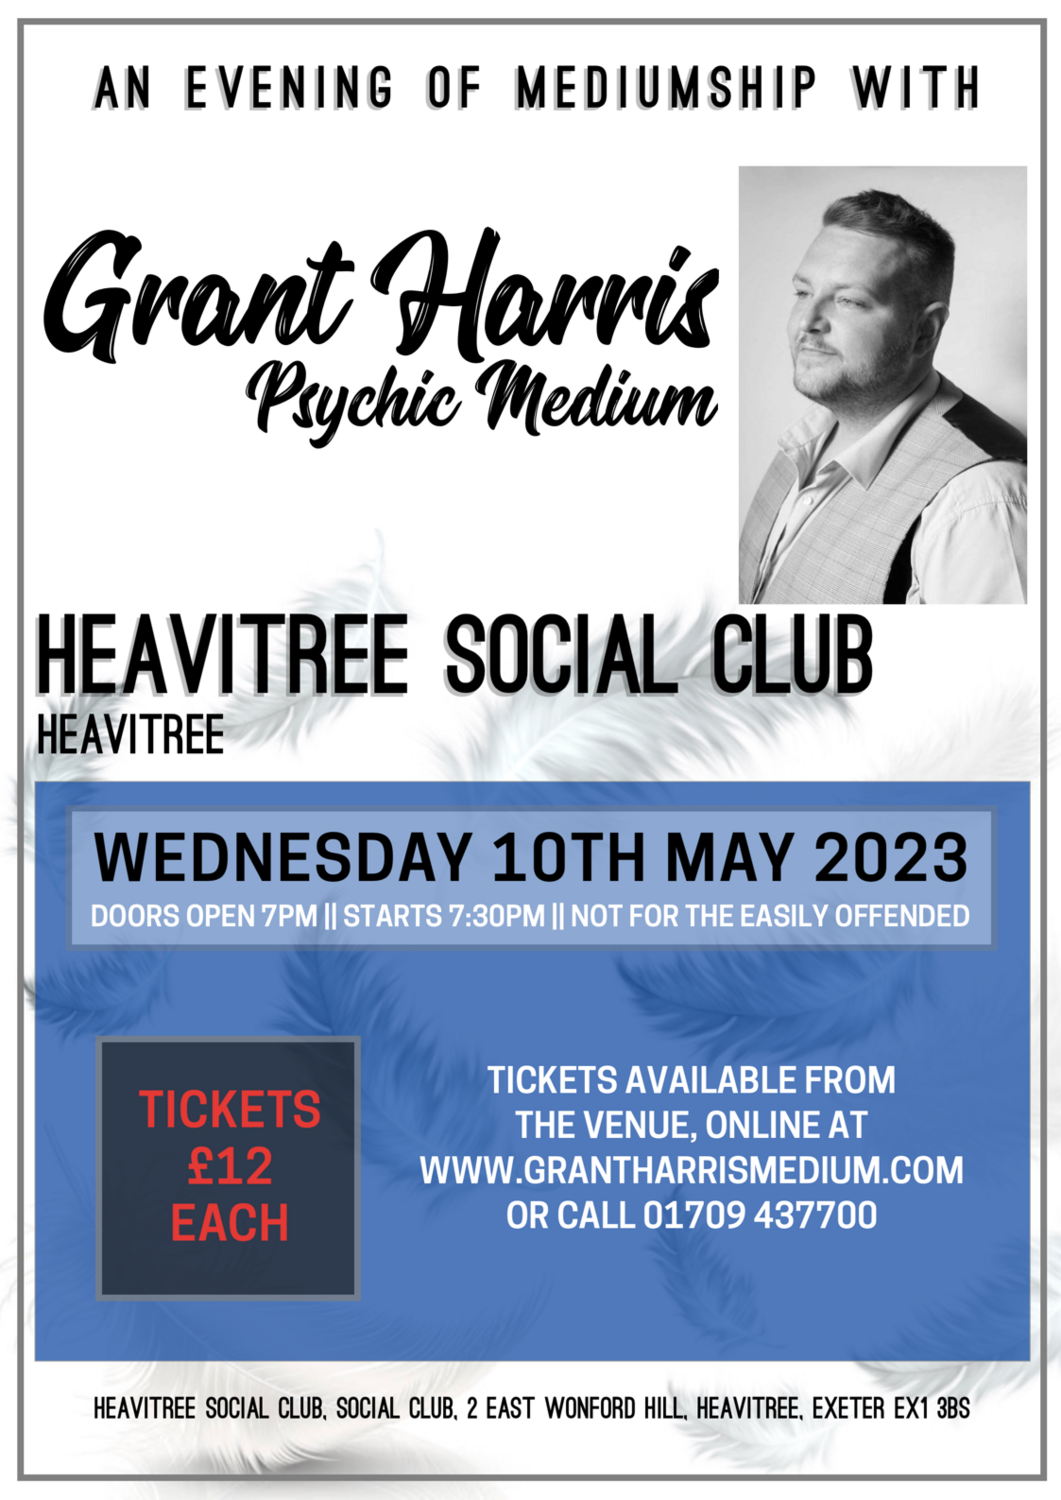 Heavitree Social Club, Exeter, Wednesday 10th May 2023